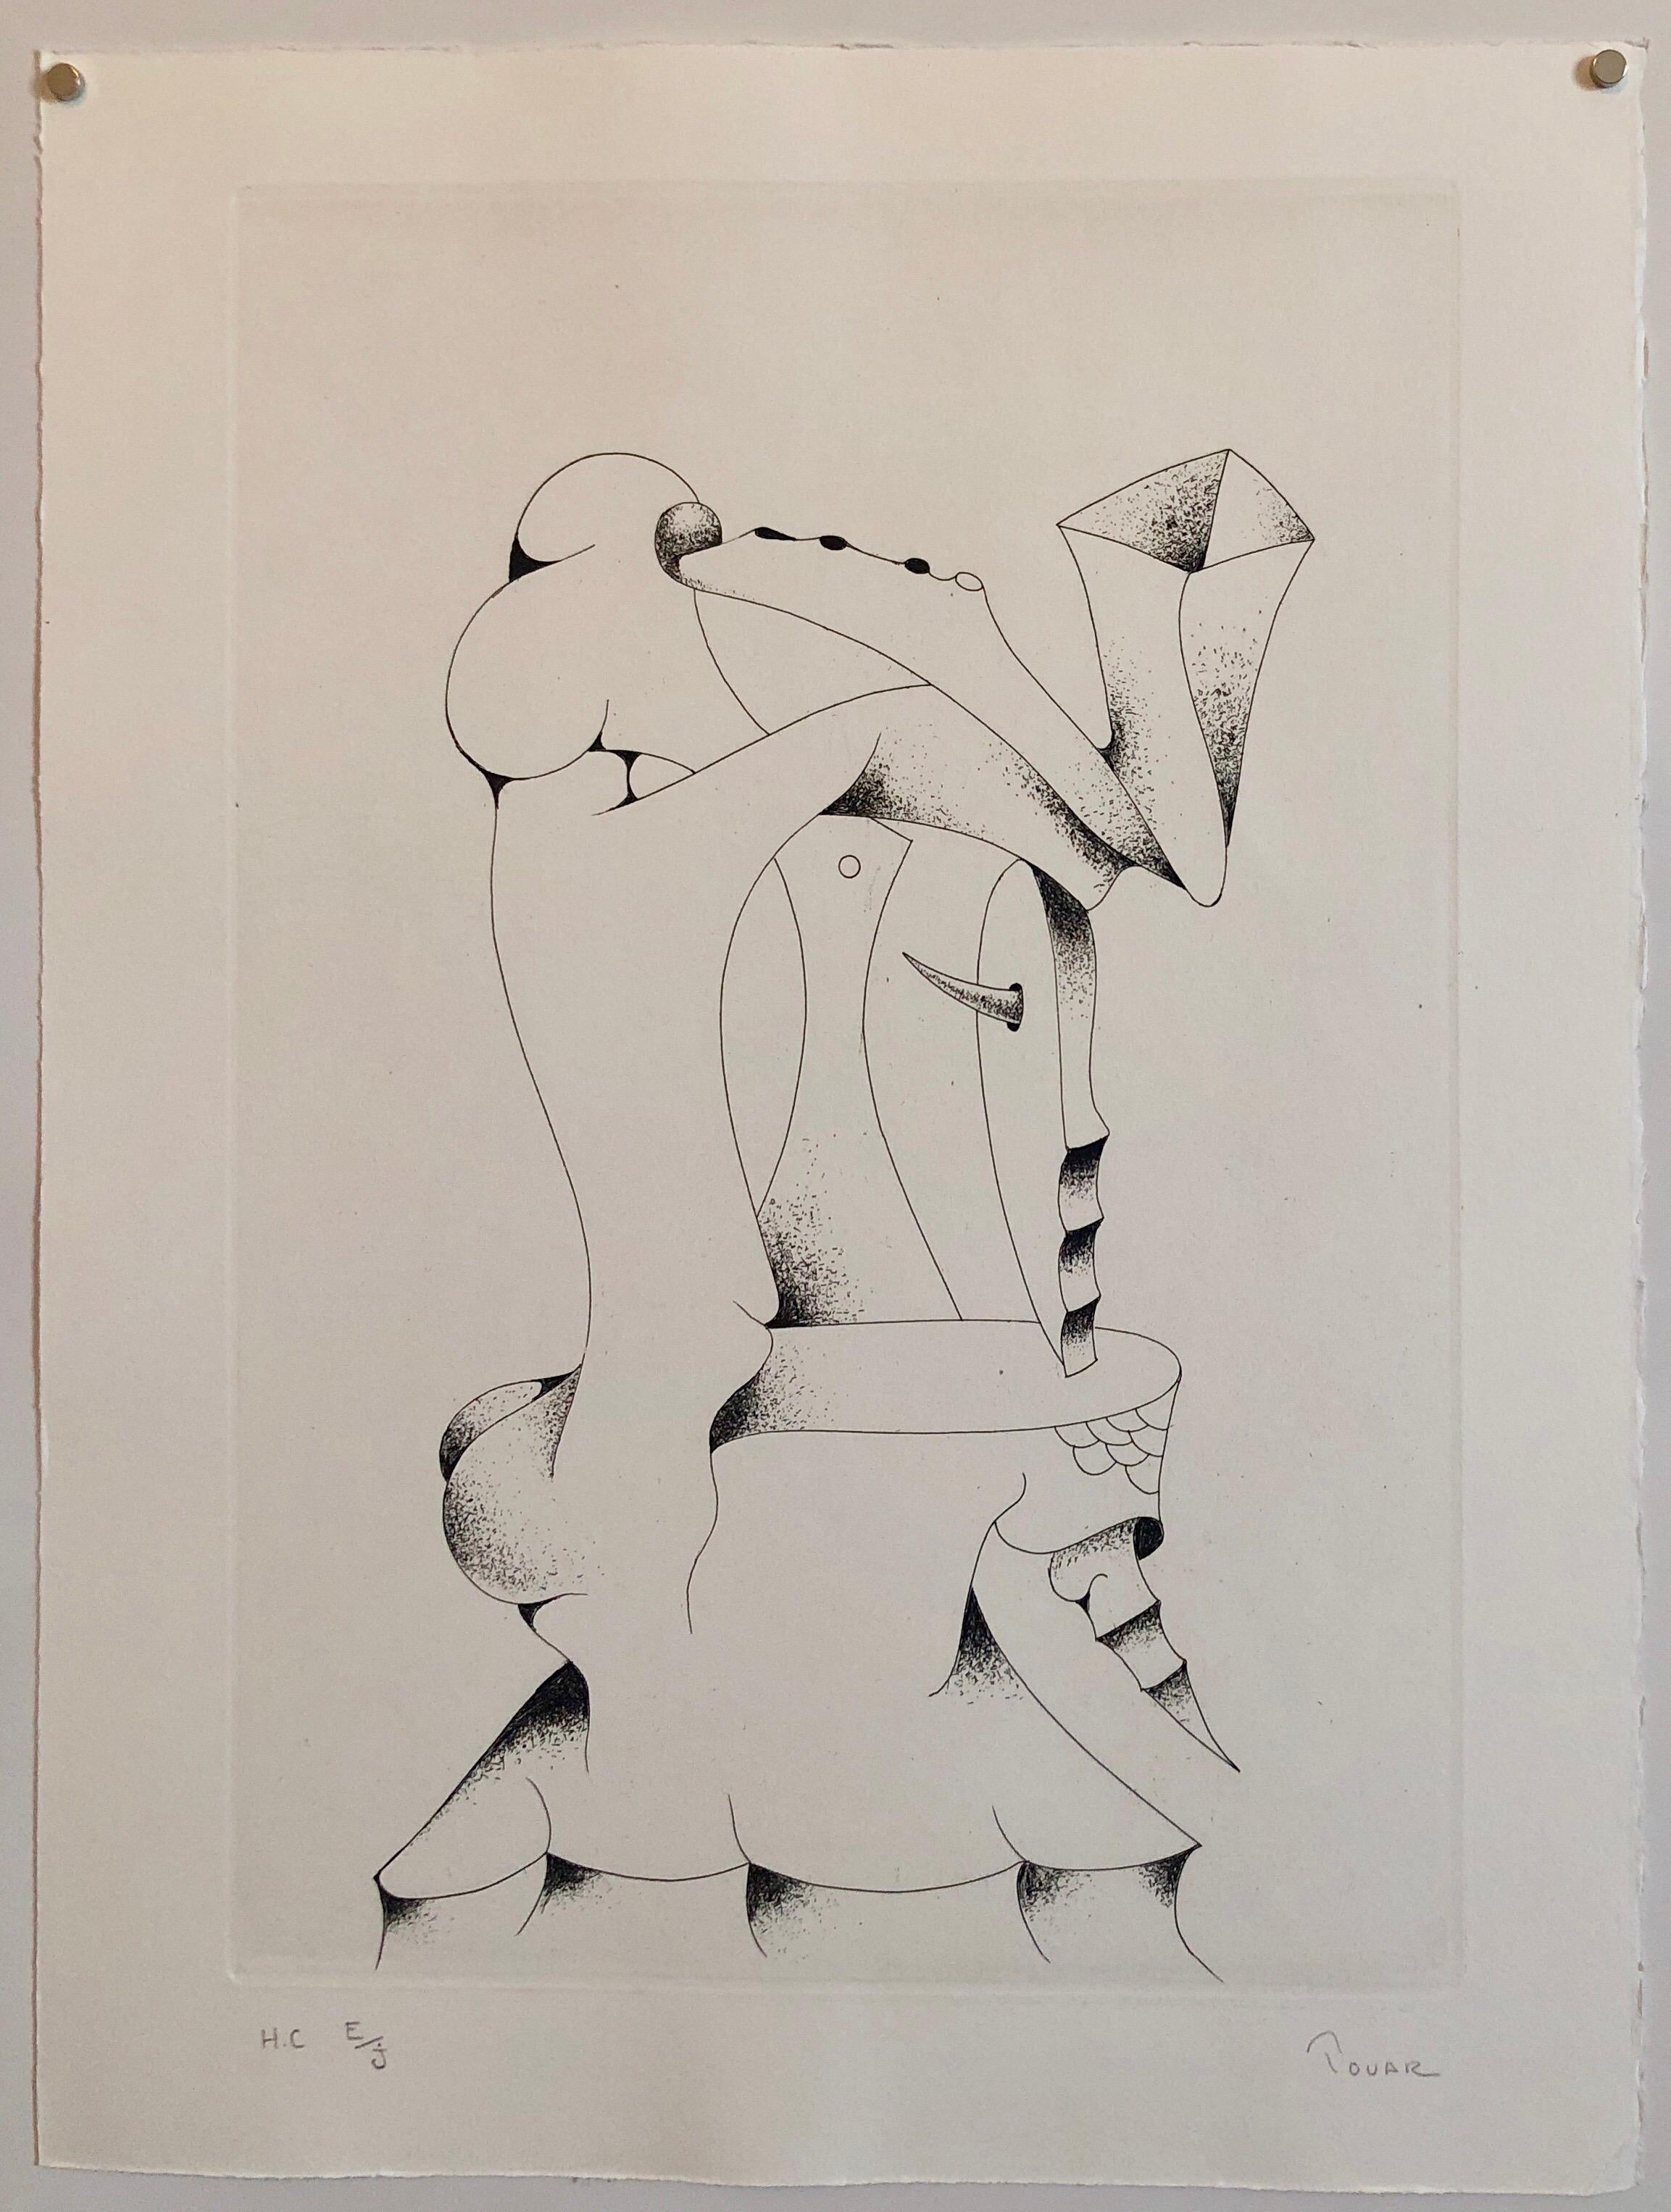 Fine drypoint etching from very small Roman Numeral edition of 10. Hand signed by pencil and hand numbered. They are all abstract some have a distinct erotic quality to them similar to Max Ernst or Salvador Dali.
Ivan Tovar Artist, Painter, graphic